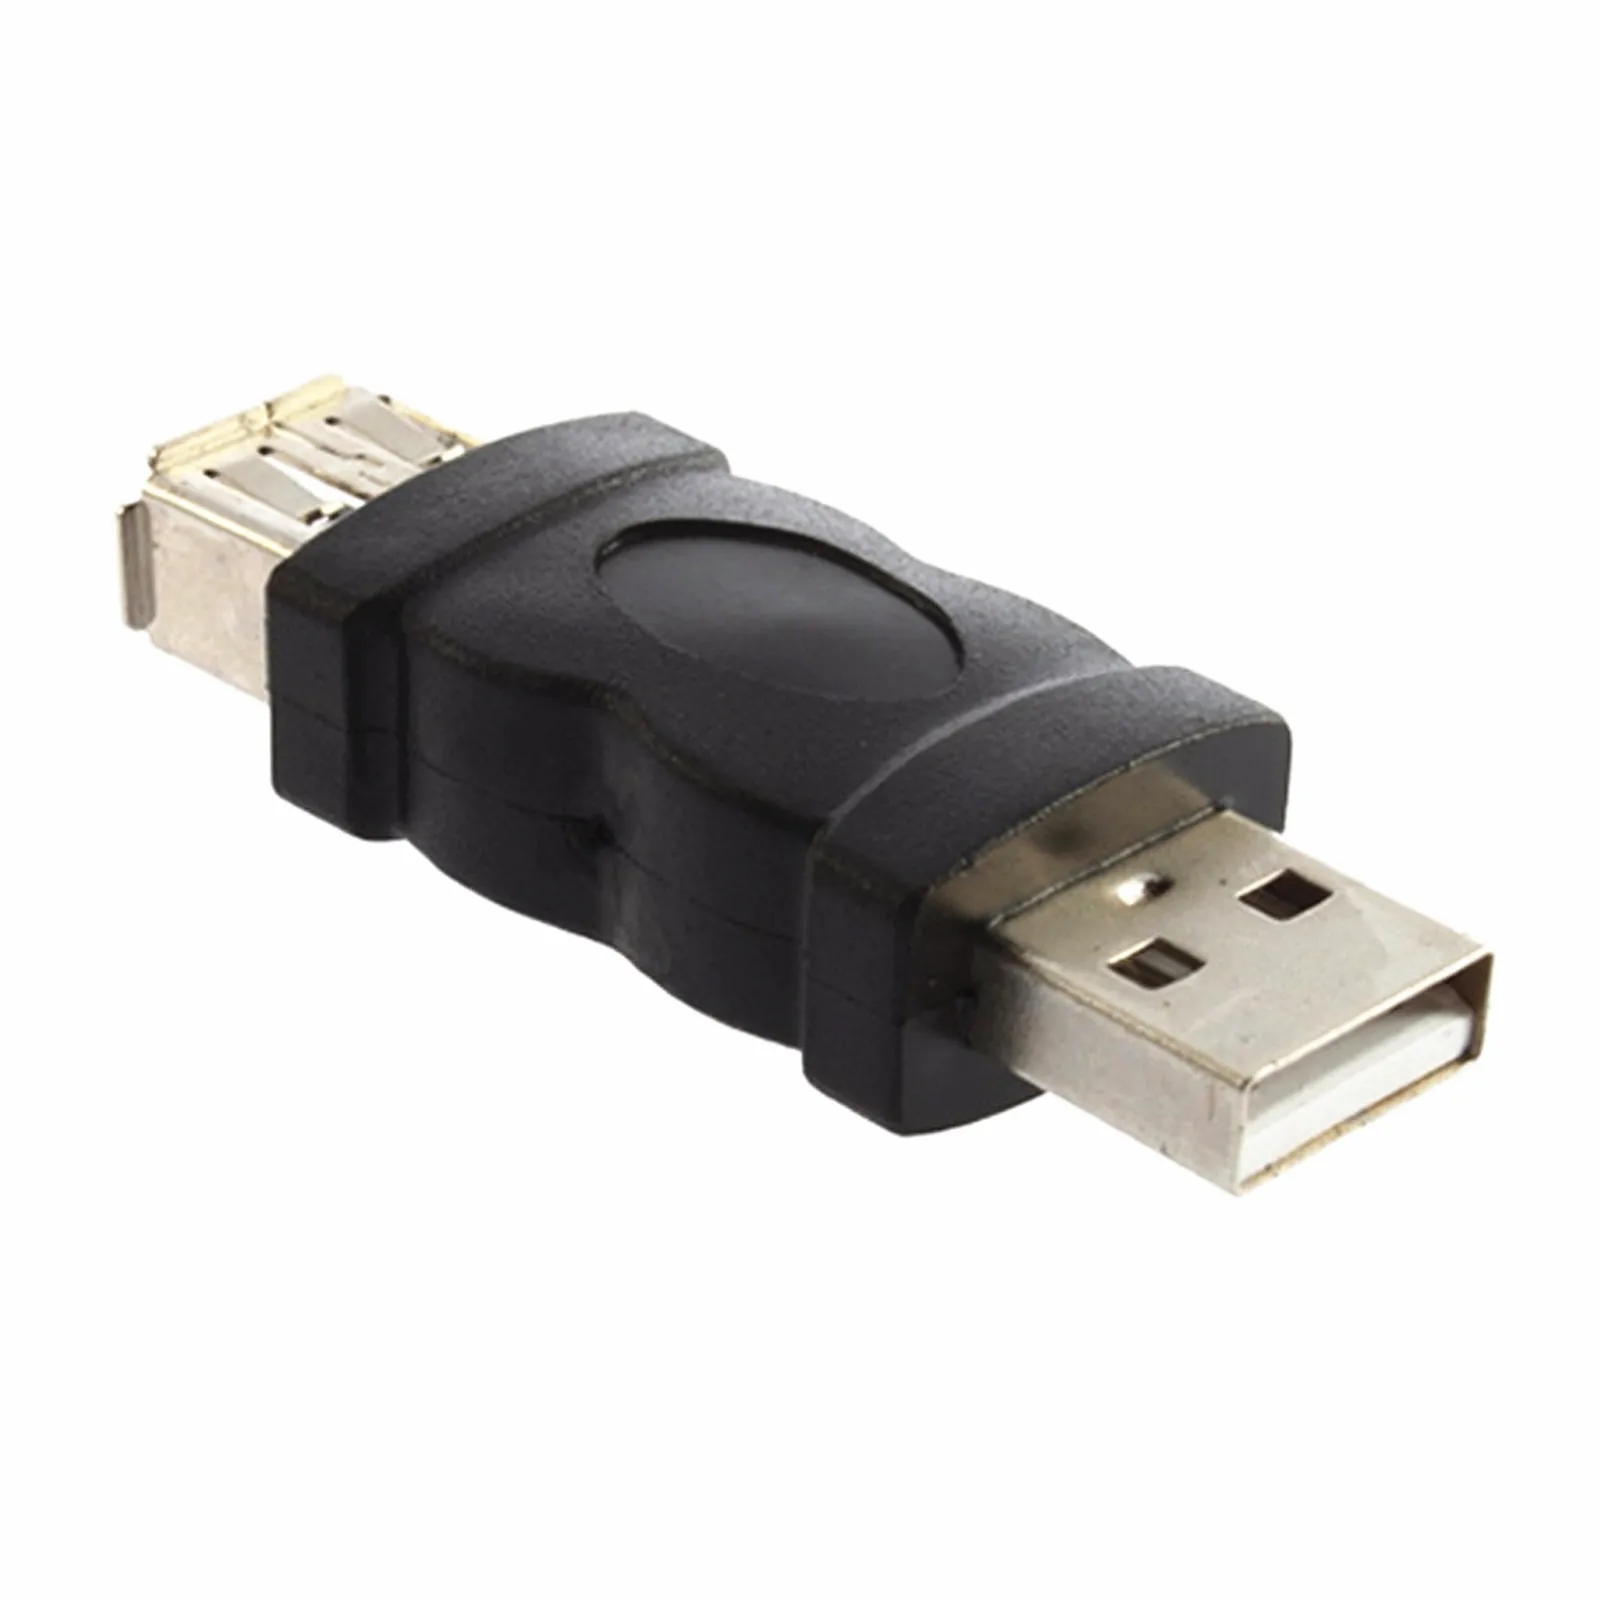 5OLD Firewire IEEE 1394 6 Pin Male to USB Male Converter Adapter :  : Informatique